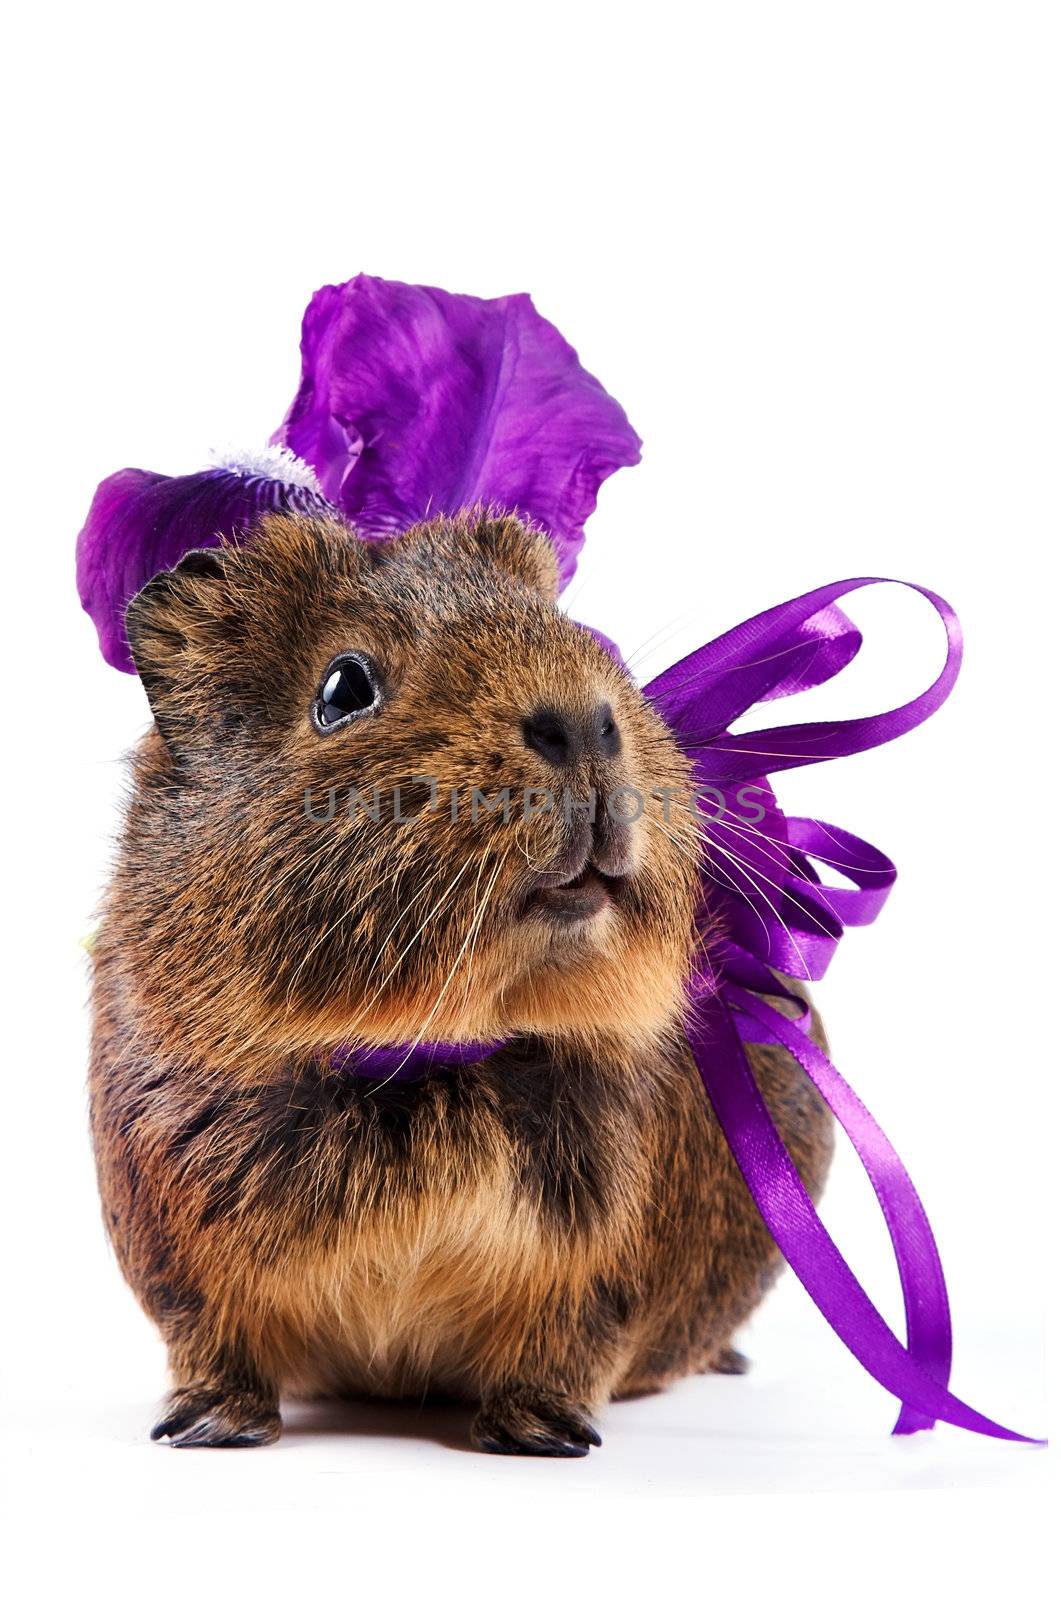 Guinea pig with a violet bow and a flower by Azaliya